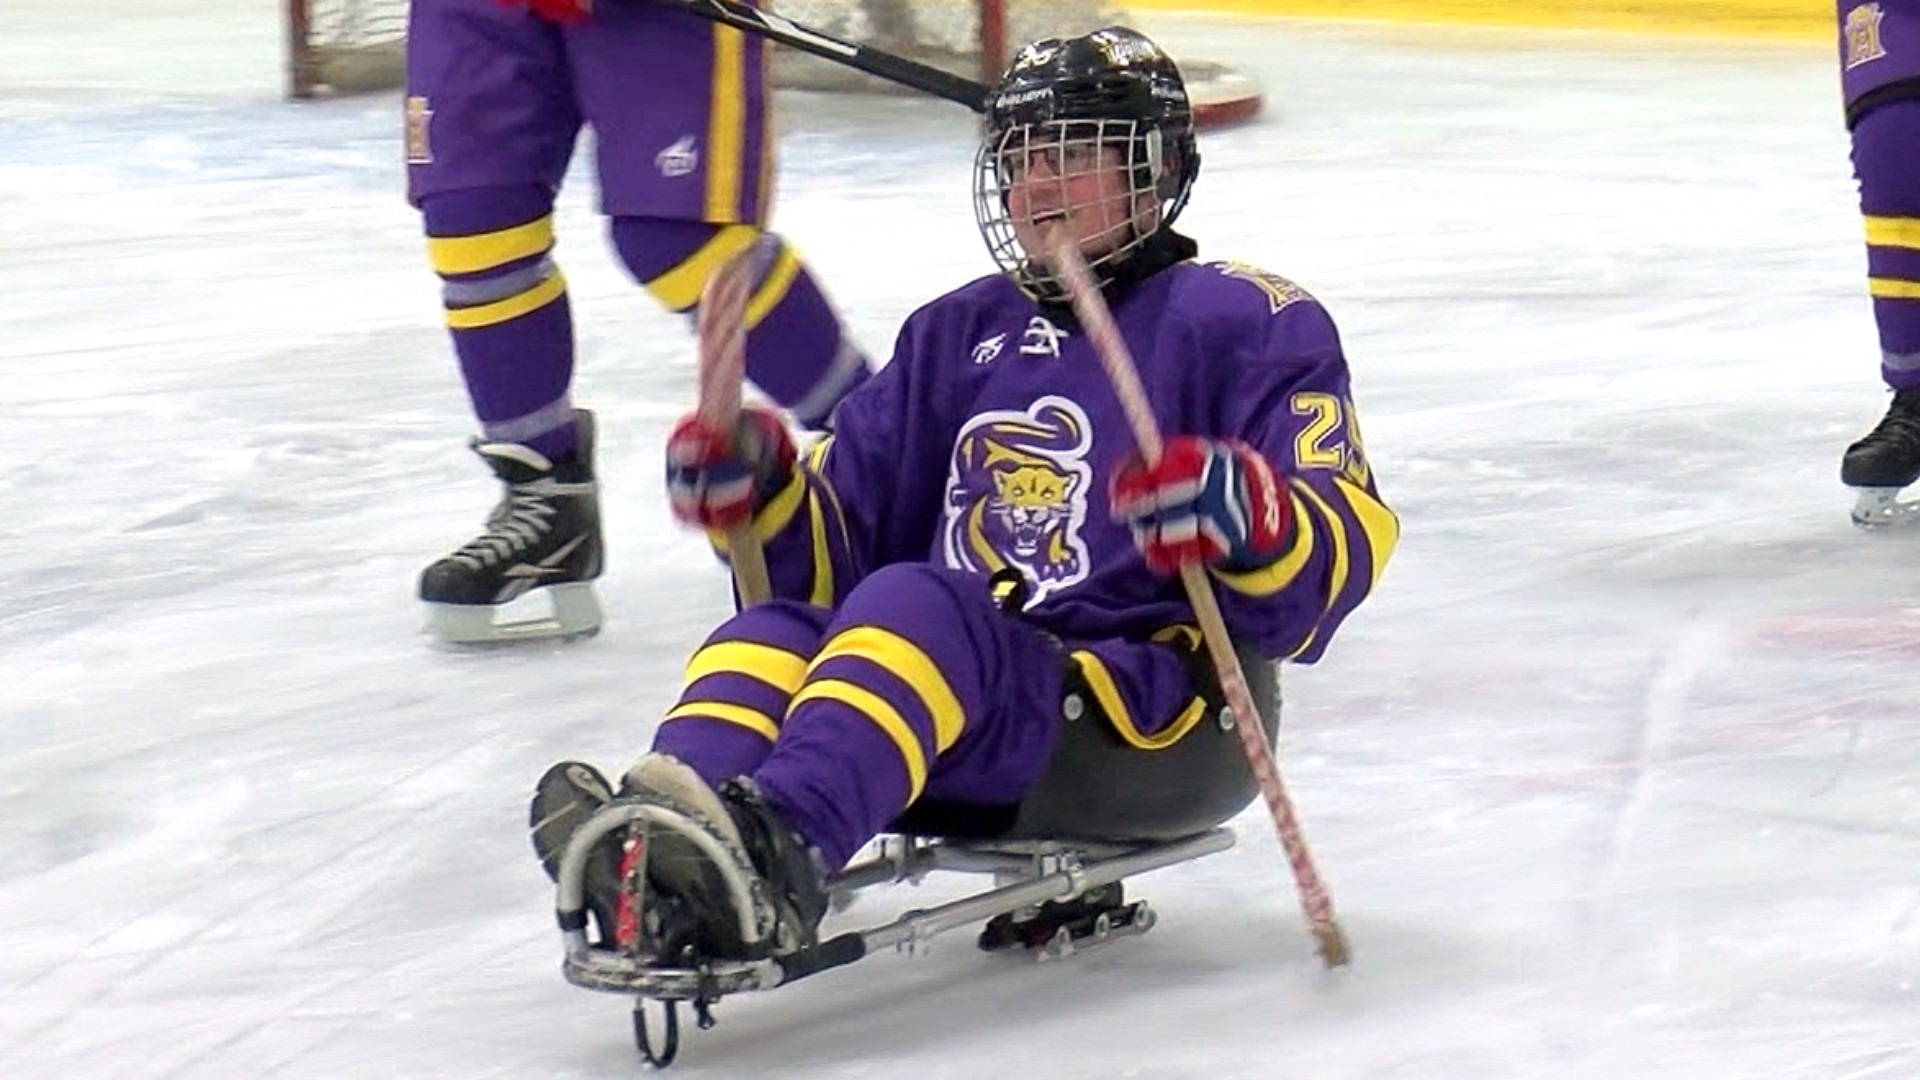 In 2019, Tyler Ruch scored a goal in his first varsity hockey game for the Maumee Panthers. He overcame incredible odds in life. On Jan. 1, Tyler passed away at 19.